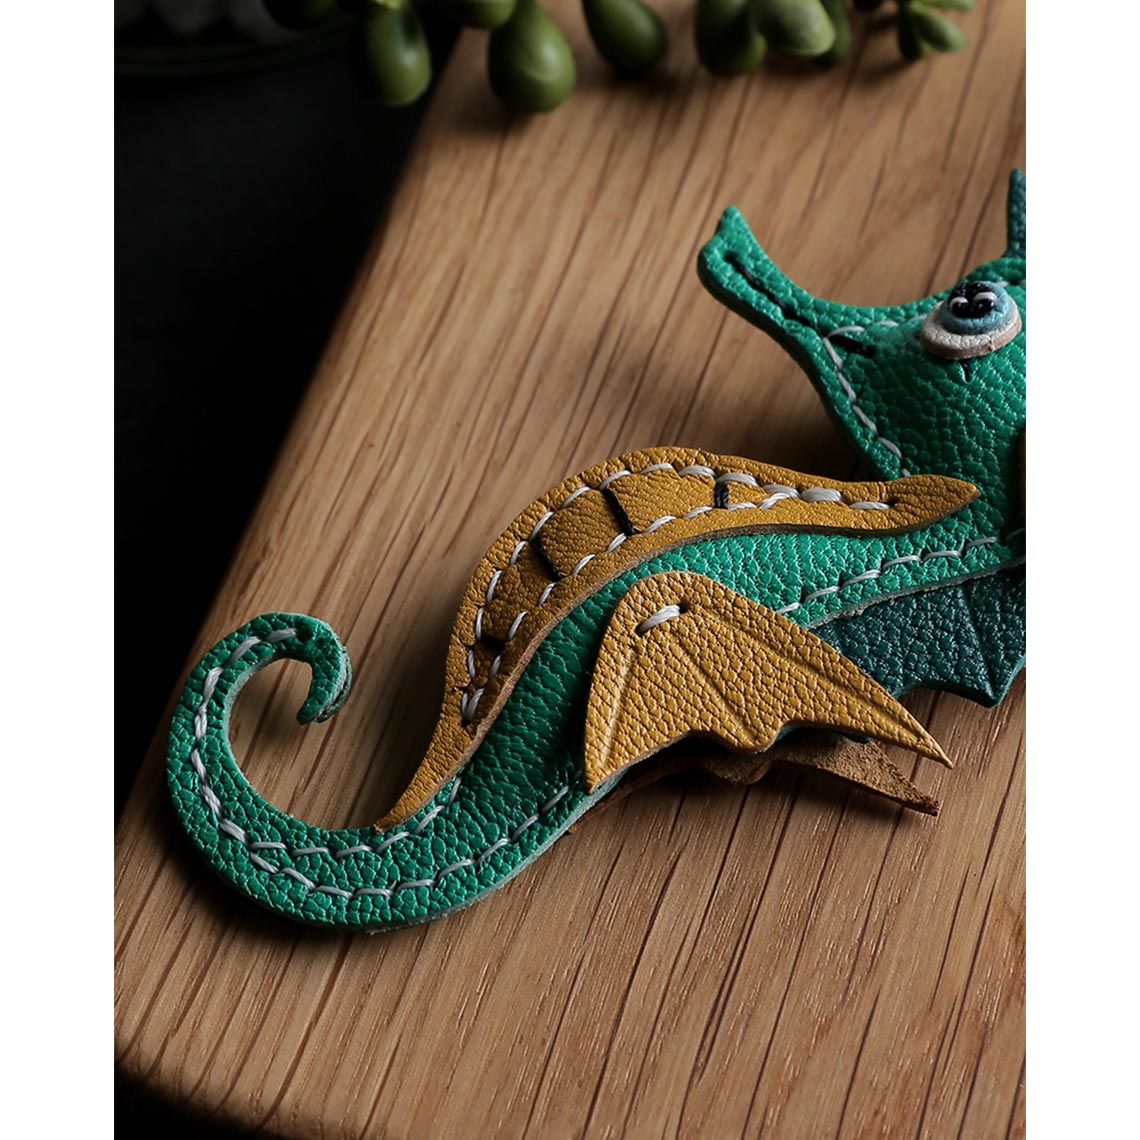 POPSEWING® Sheep Leather Sea Horse Bag Charm DIY Kit